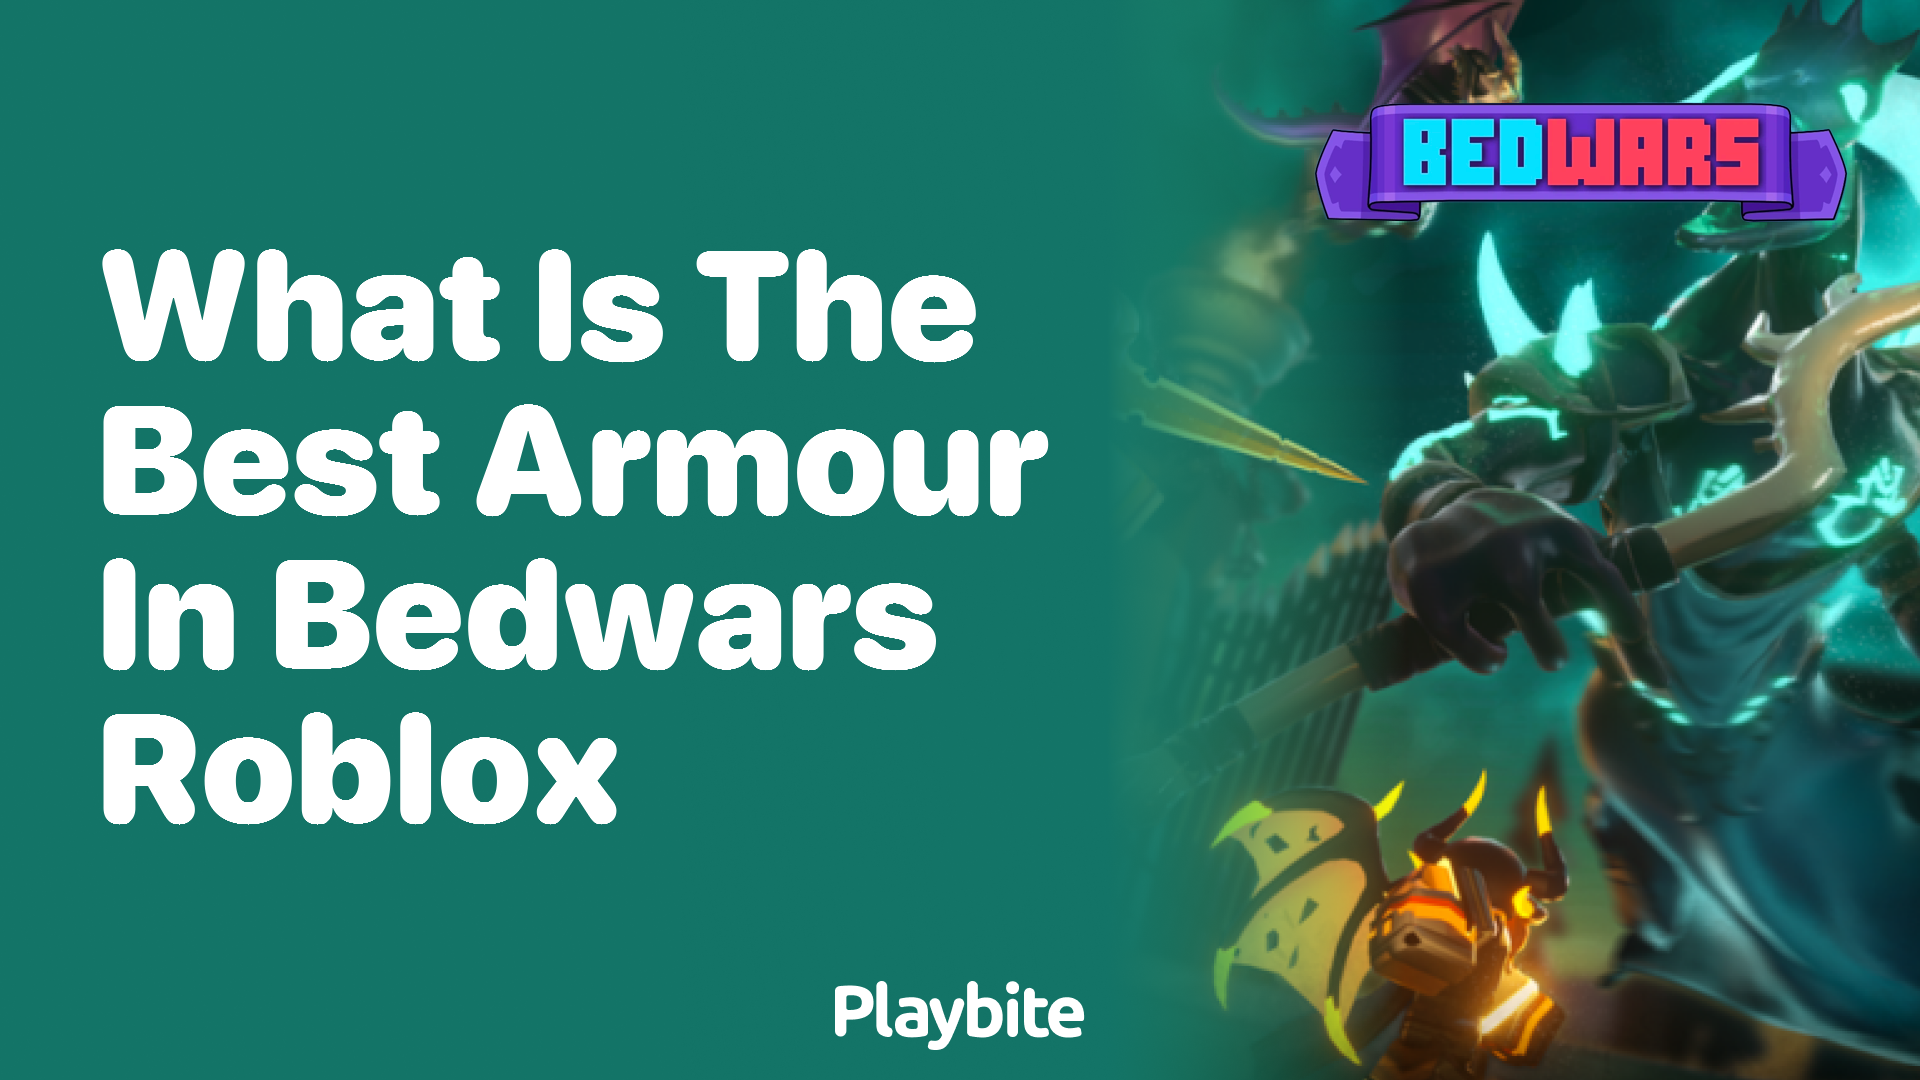 What is the Best Armor in Bedwars Roblox?